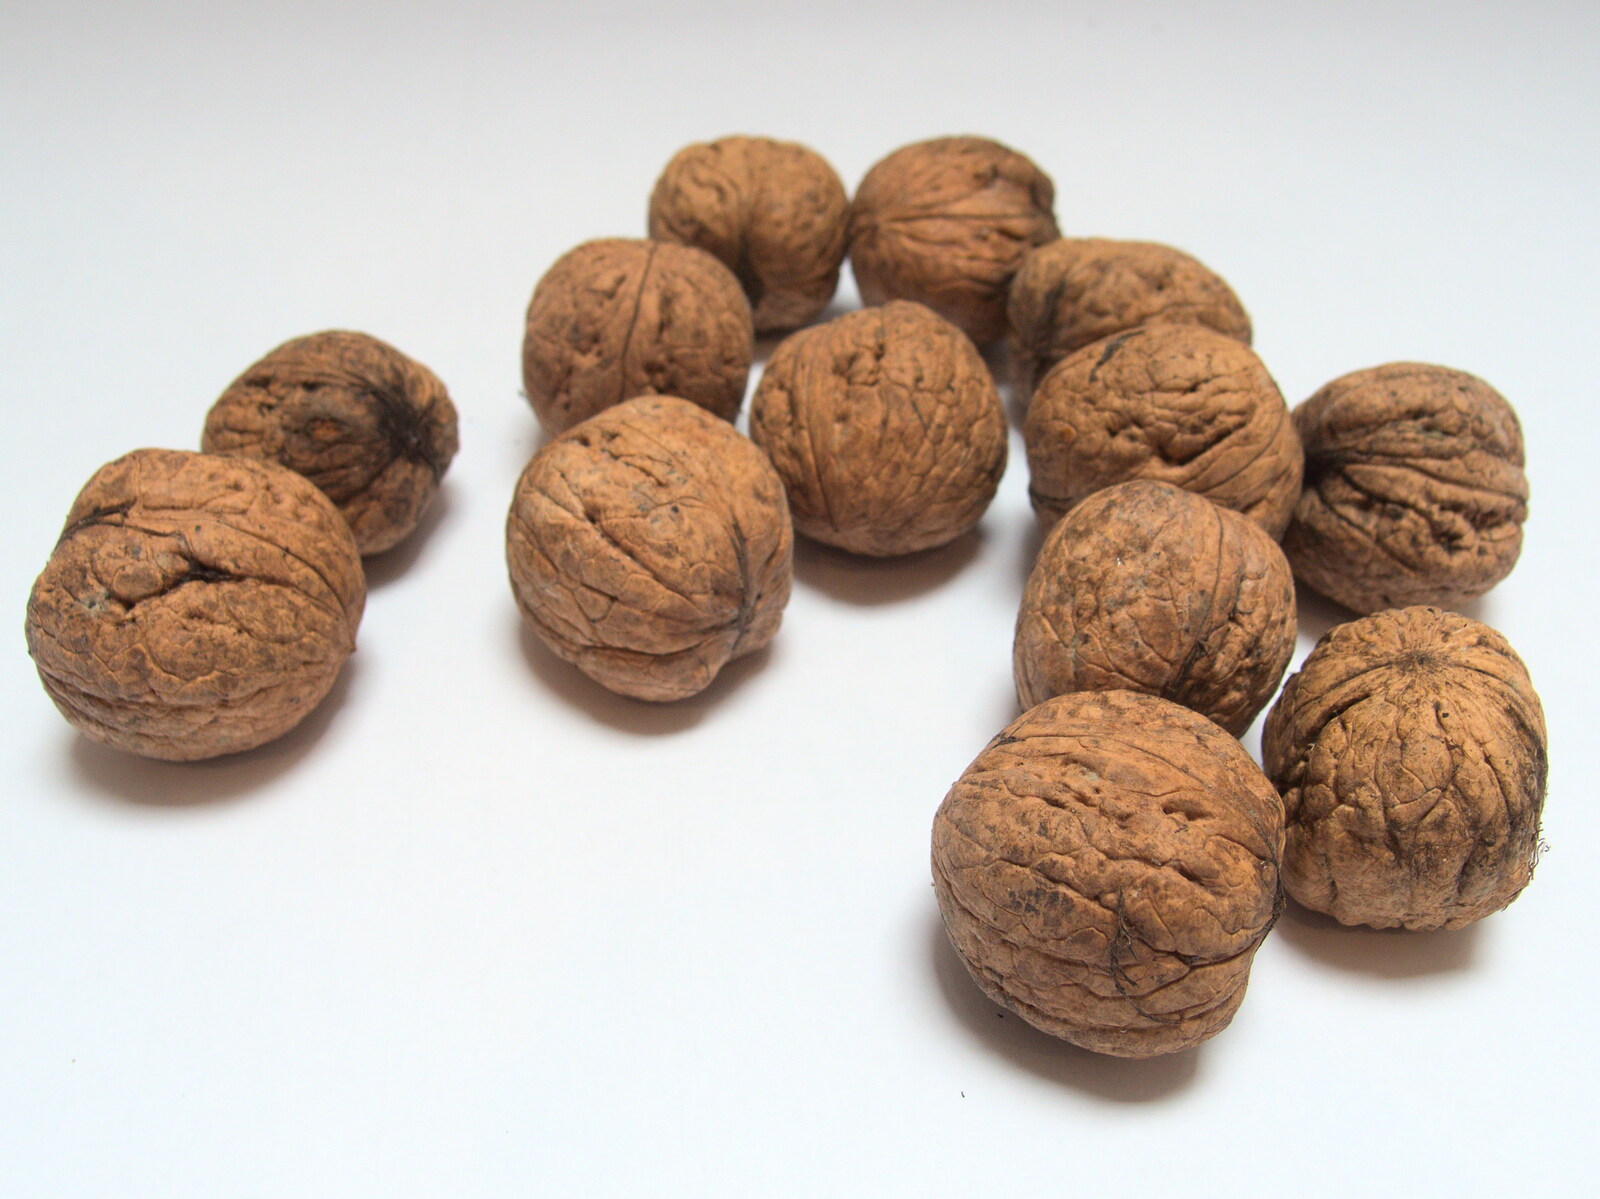 A bunch of walnuts from (Very) Long Train (Not) Running, Stowmarket, Suffolk - 21st October 2014